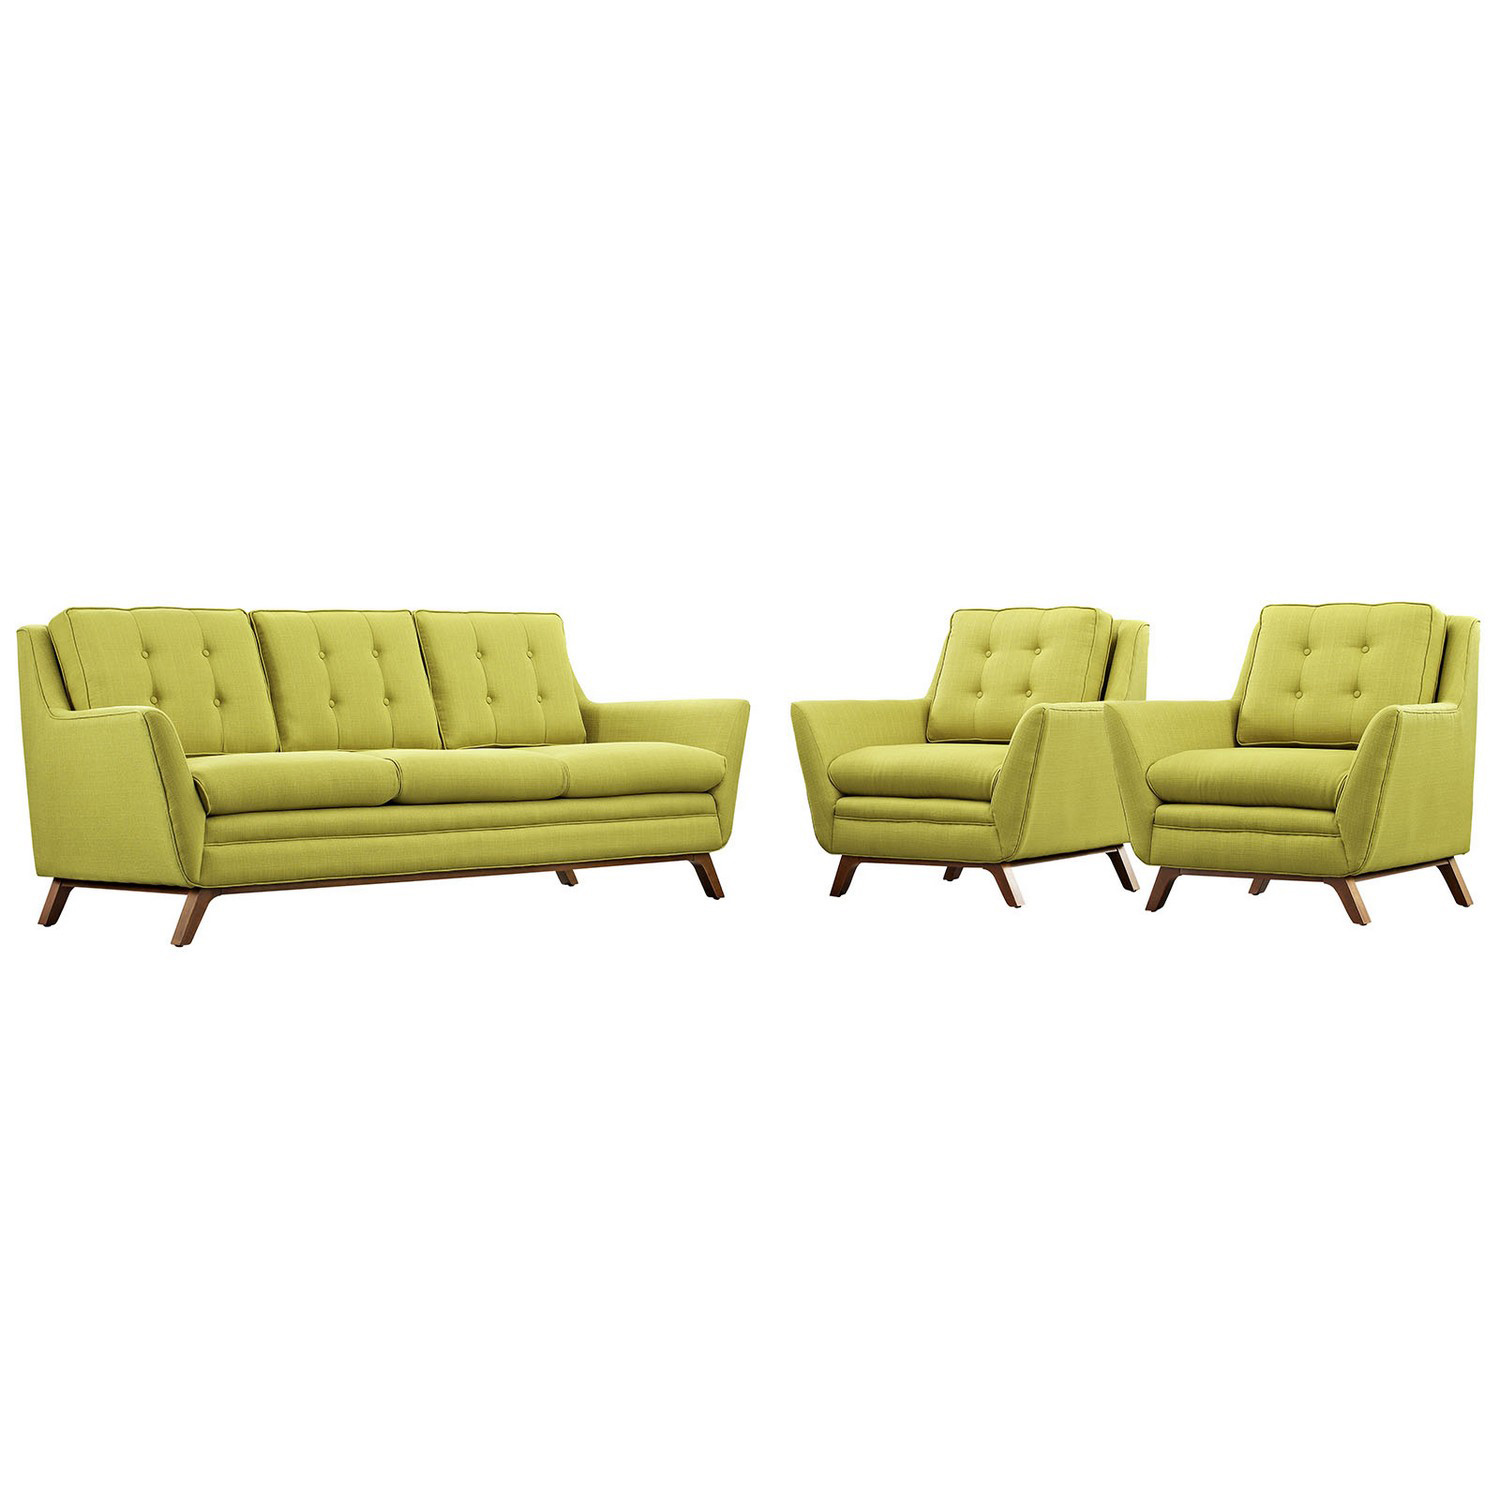 Modway Beguile 3 Piece Fabric Living Room Set - Wheatgrass